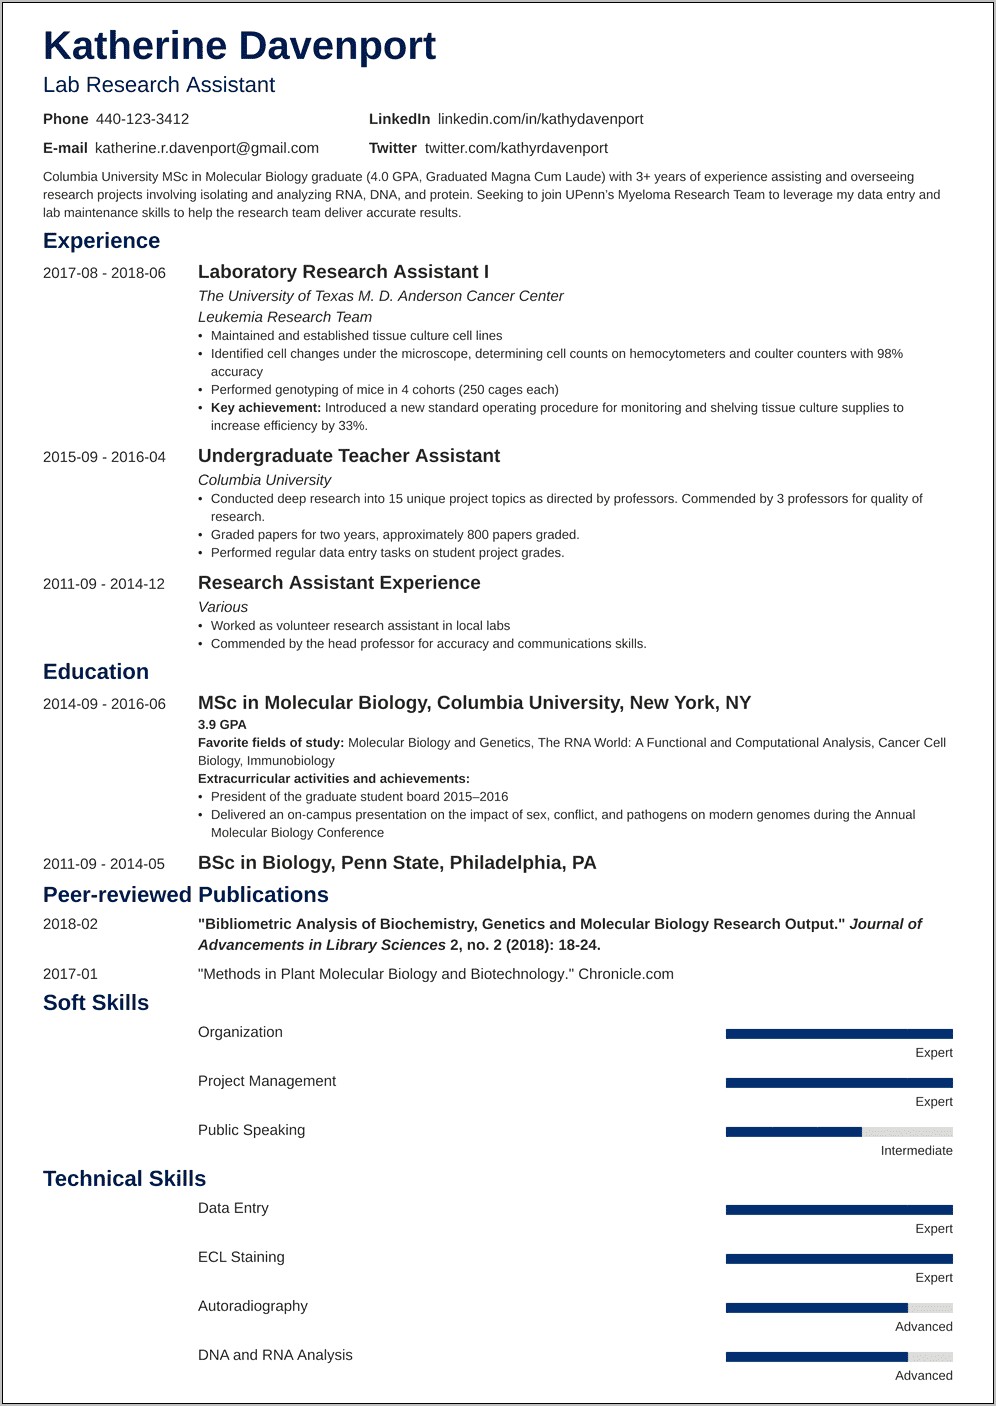 Sample Resume For Lab Research Assitant